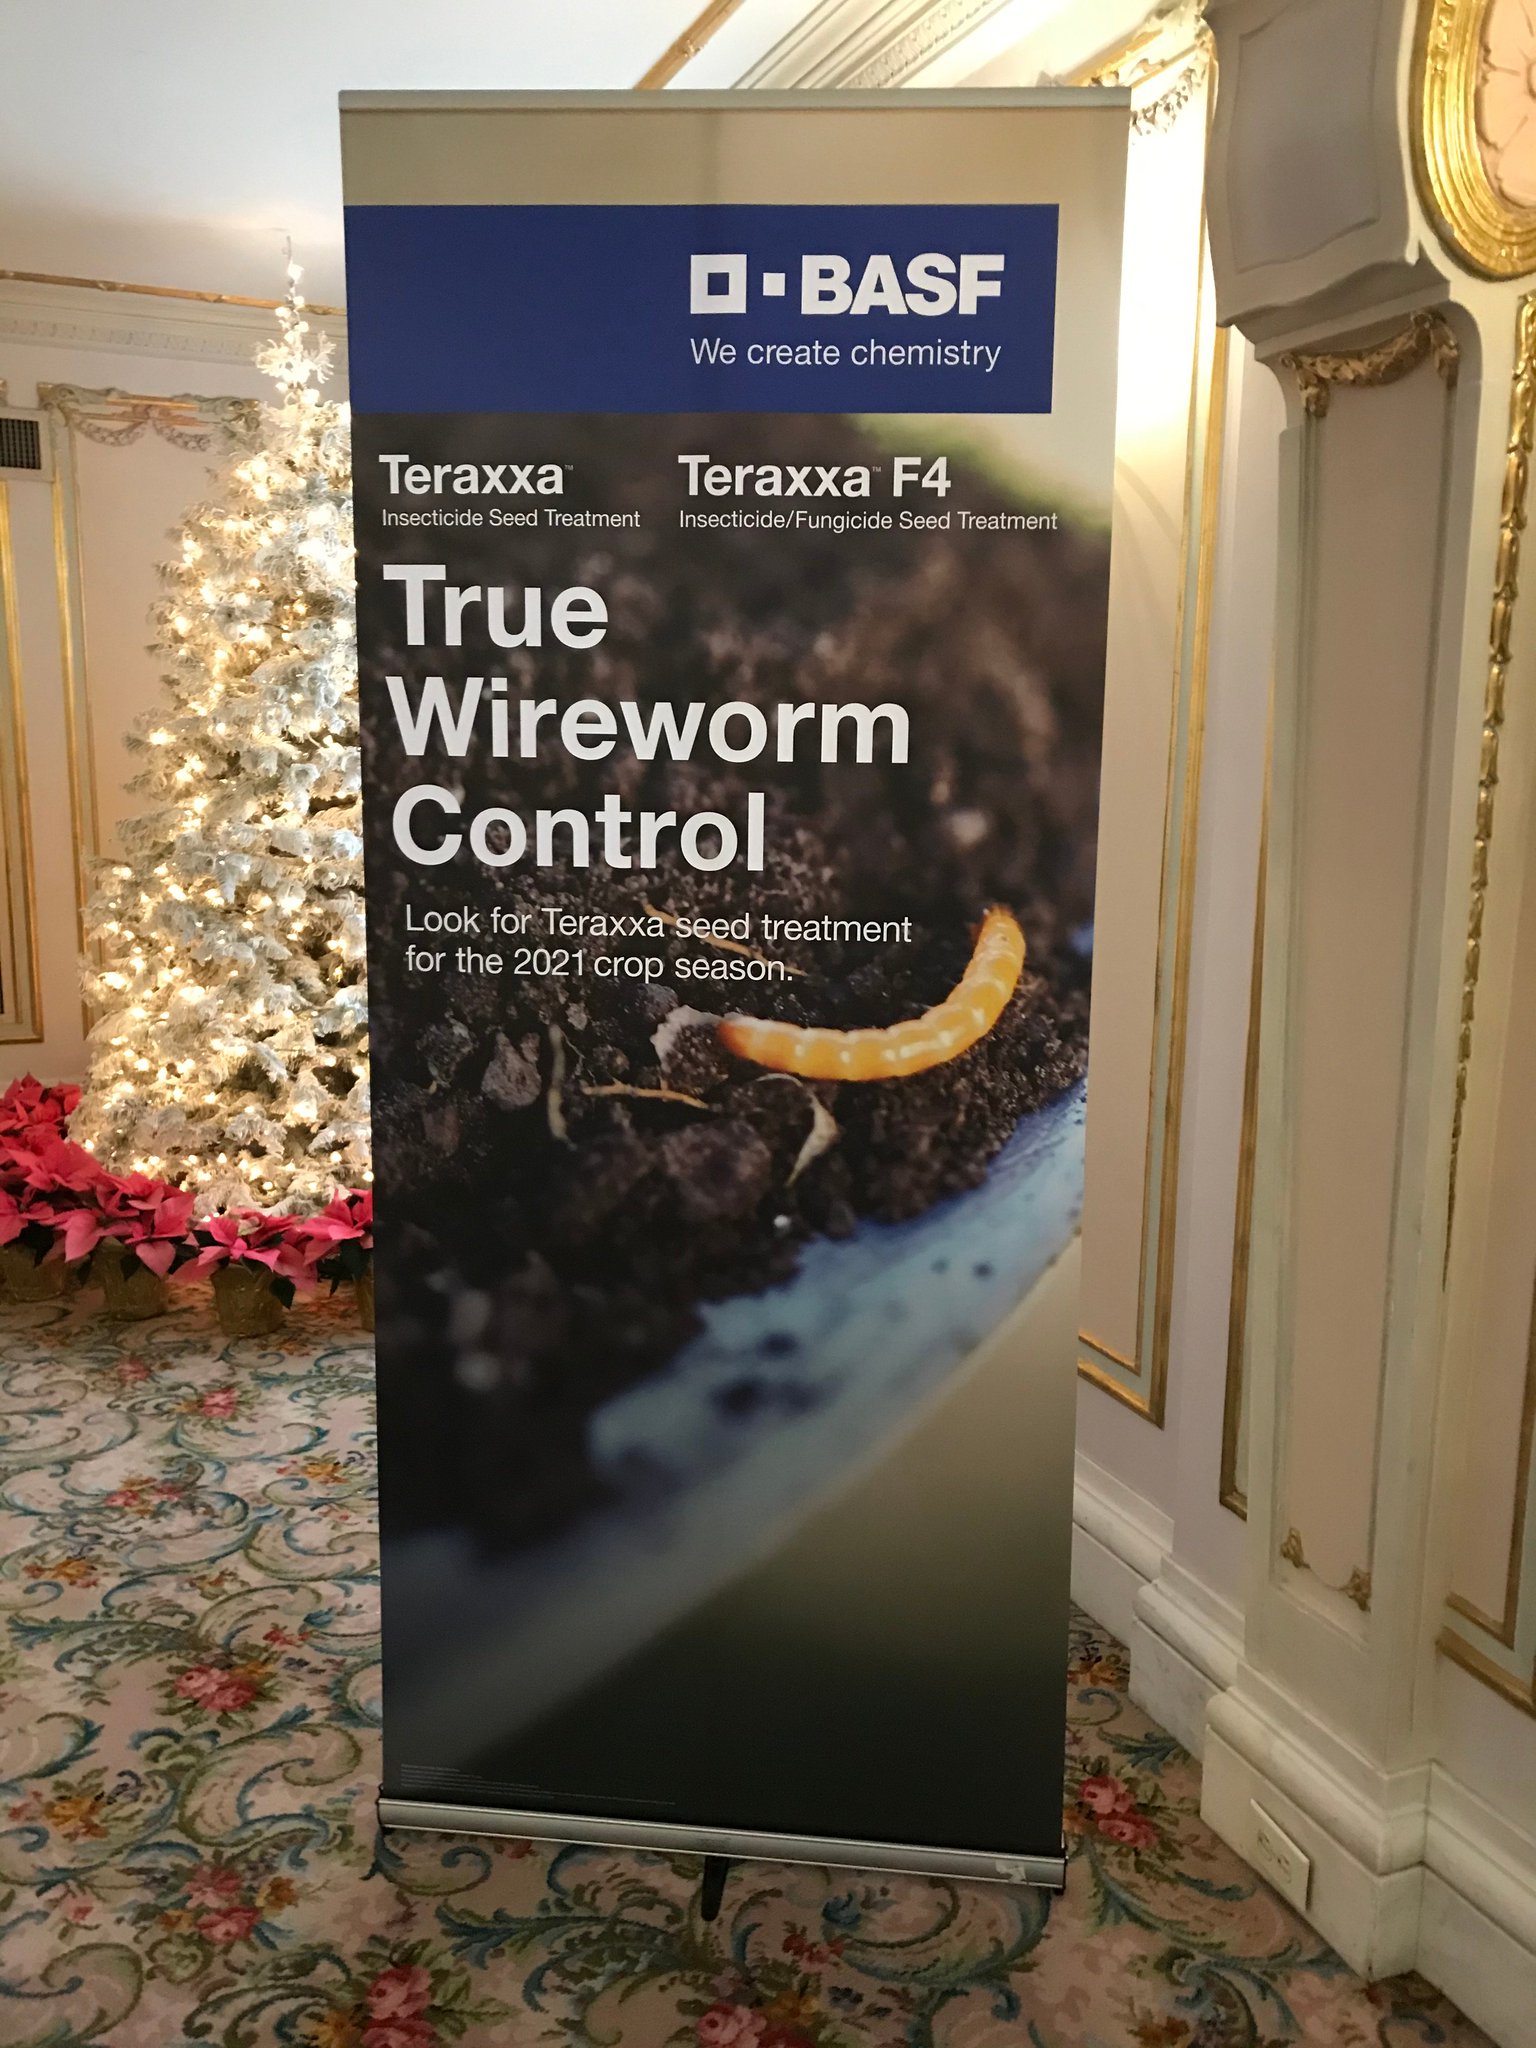 BASF AgSolutions US on X: "If you're looking for true #wireworm control,  look no further. BASF hosted a seminar that was all about wireworms and its  new Teraxxa insecticide seed treatment, anticipated